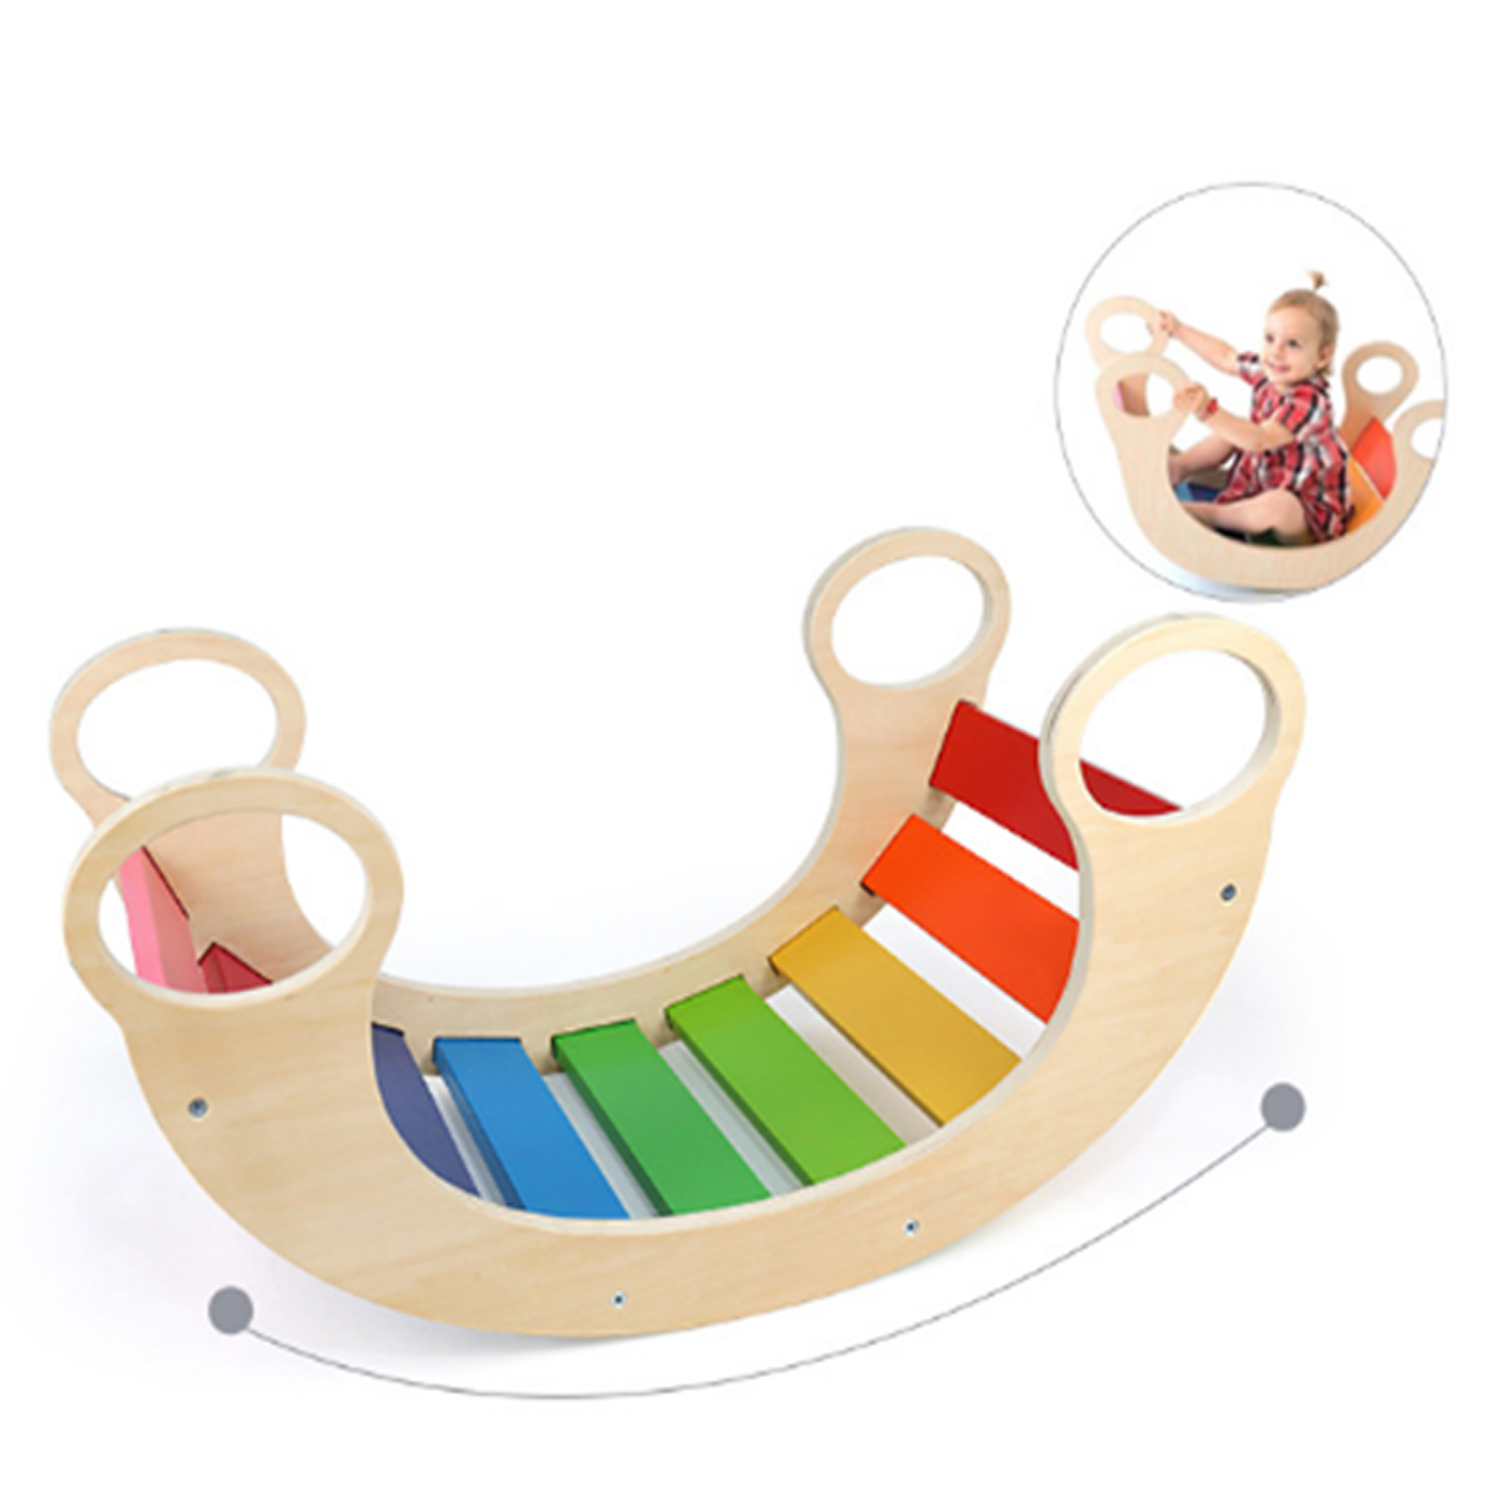 XIHAToy Childrens Rainbow Rocking Chair Pikler Triangle Rocker Seesaw Indoor Climbing Toys Seats for Baby